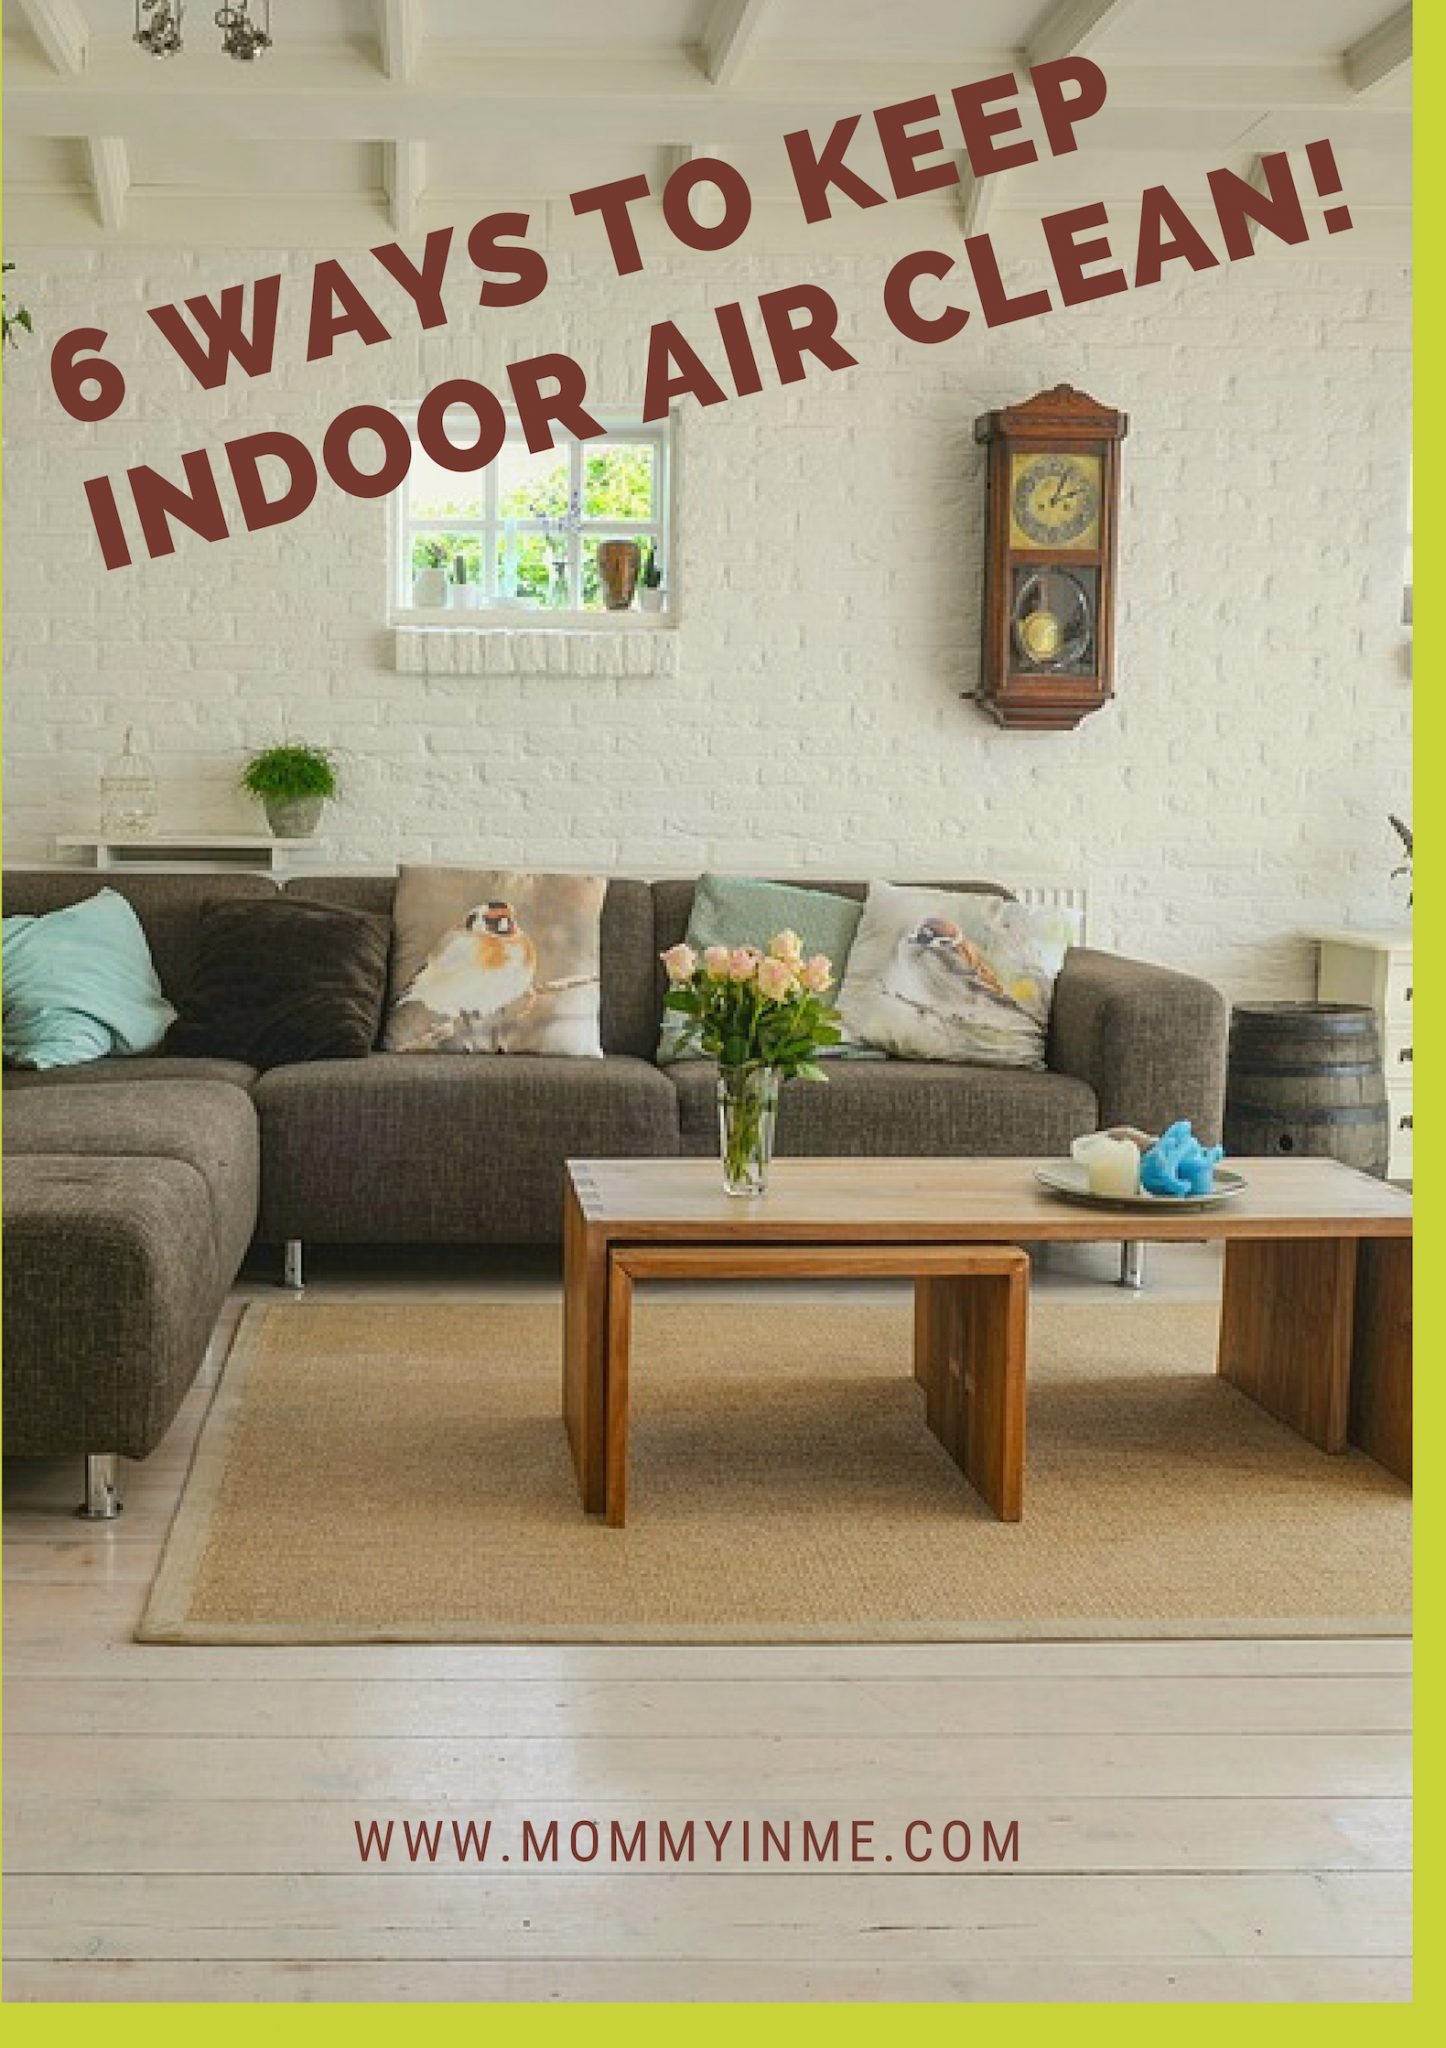 We’re all struggling as the news flashes of worst Delhi Air Quality recorded every day. Here are some easy ways to reduce the Indoor Air Pollution. Air Purifier, Charcoal activated bags, dehumidifiers, indoor plants, No indoor smoking are some great options. Read more. #indoorair #airpollution #DelhiAir #AirqualityIndex #AQI #DelhiPollution #Indoorplants #Airpurifier 